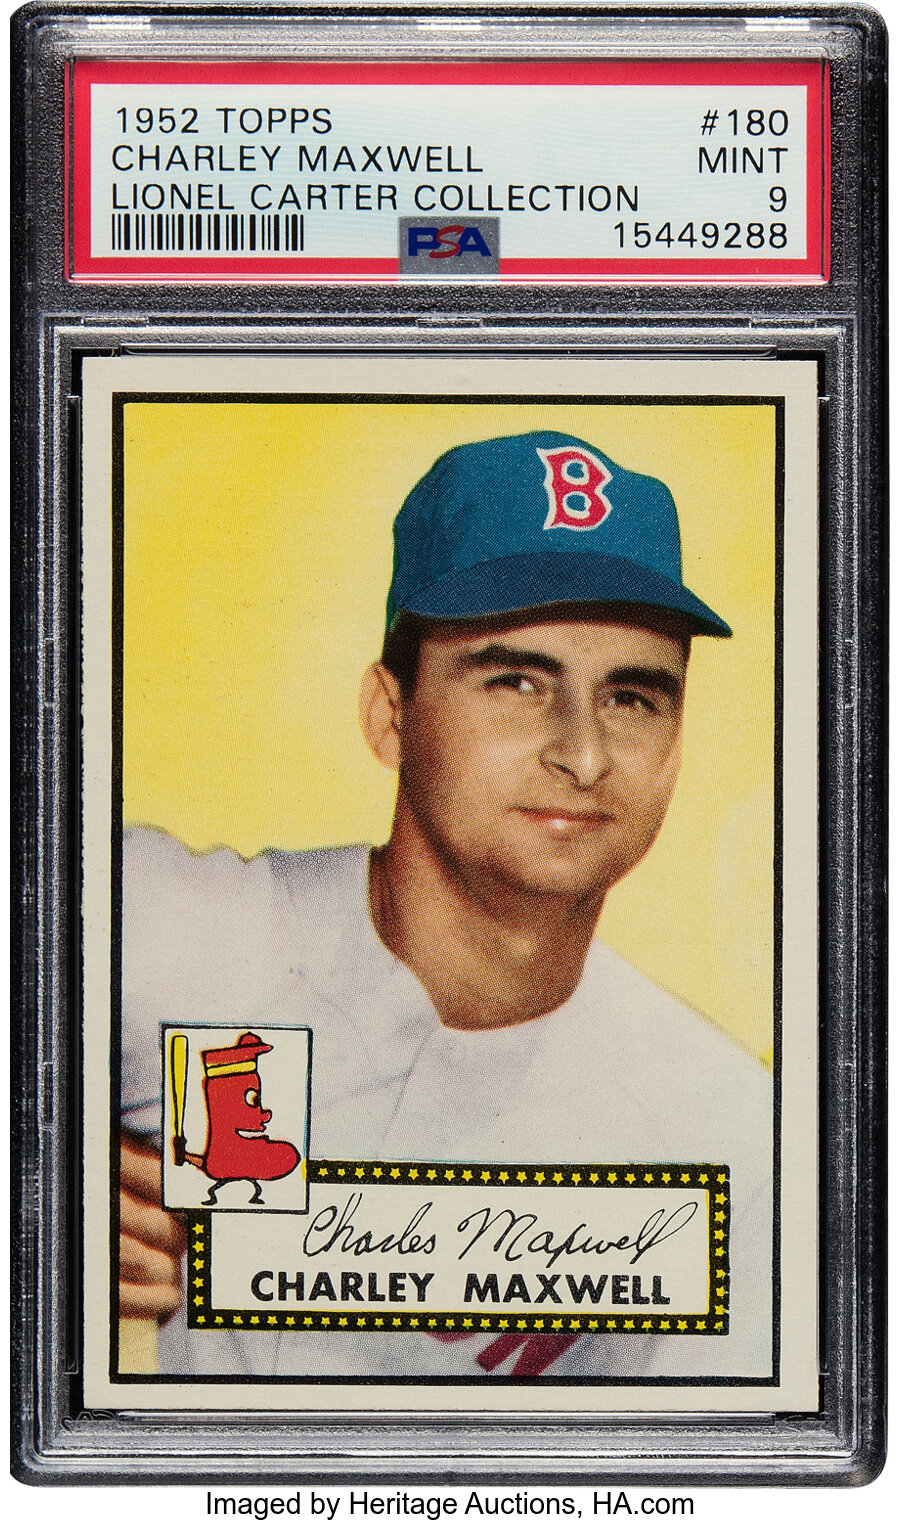 1952 Topps Charley Maxwell Rookie #180 PSA Mint 9 - Pop Three, None Superior! From the Lionel Carter Collection